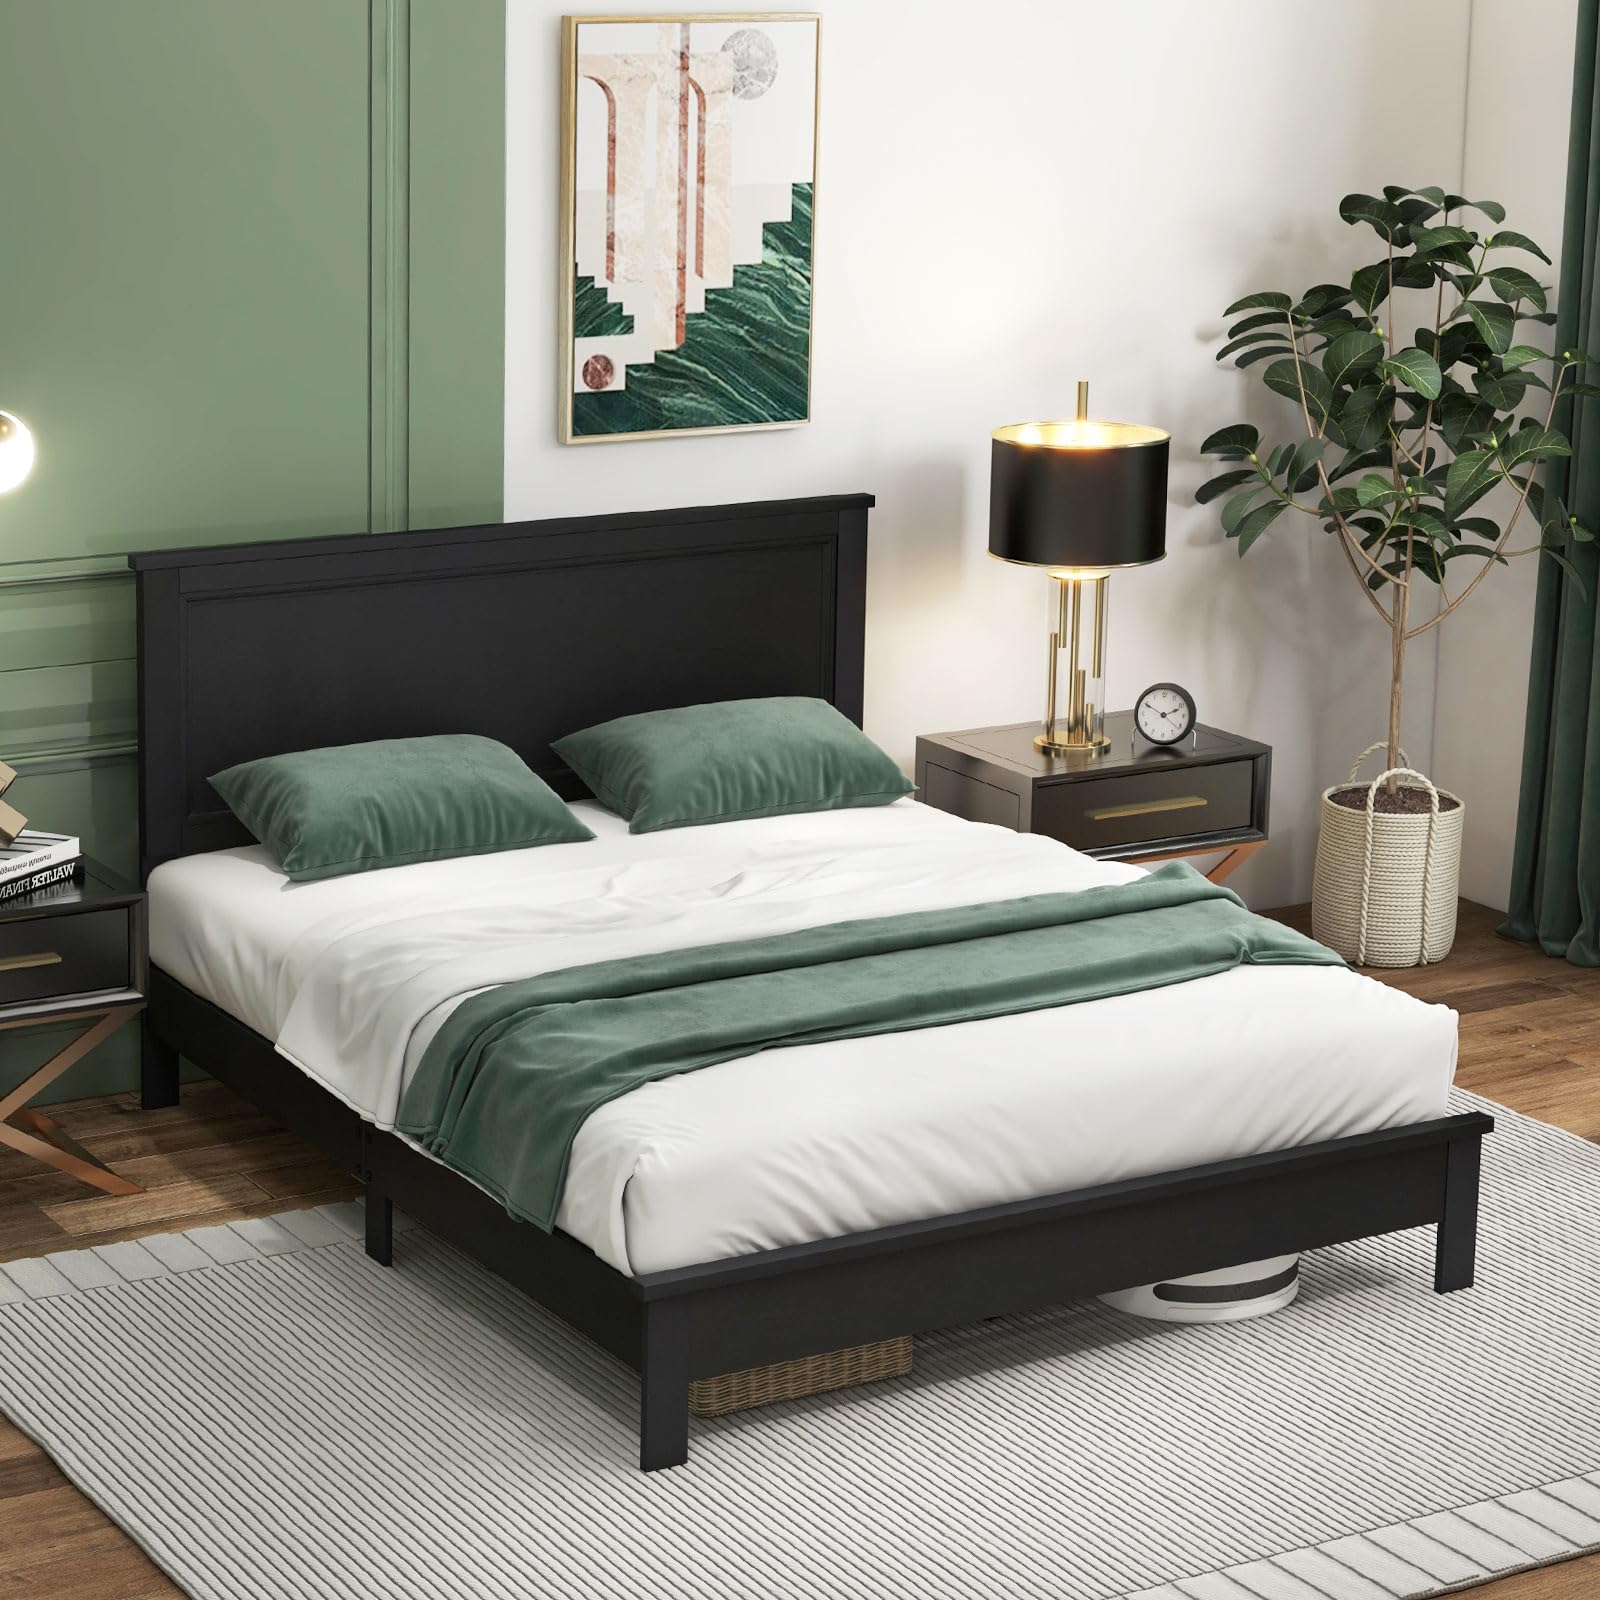 Giantex Wood Platform Bed Frame with Headboard, Mid Century Bed Frame with Solid Wood Legs & Wooden Slat Support